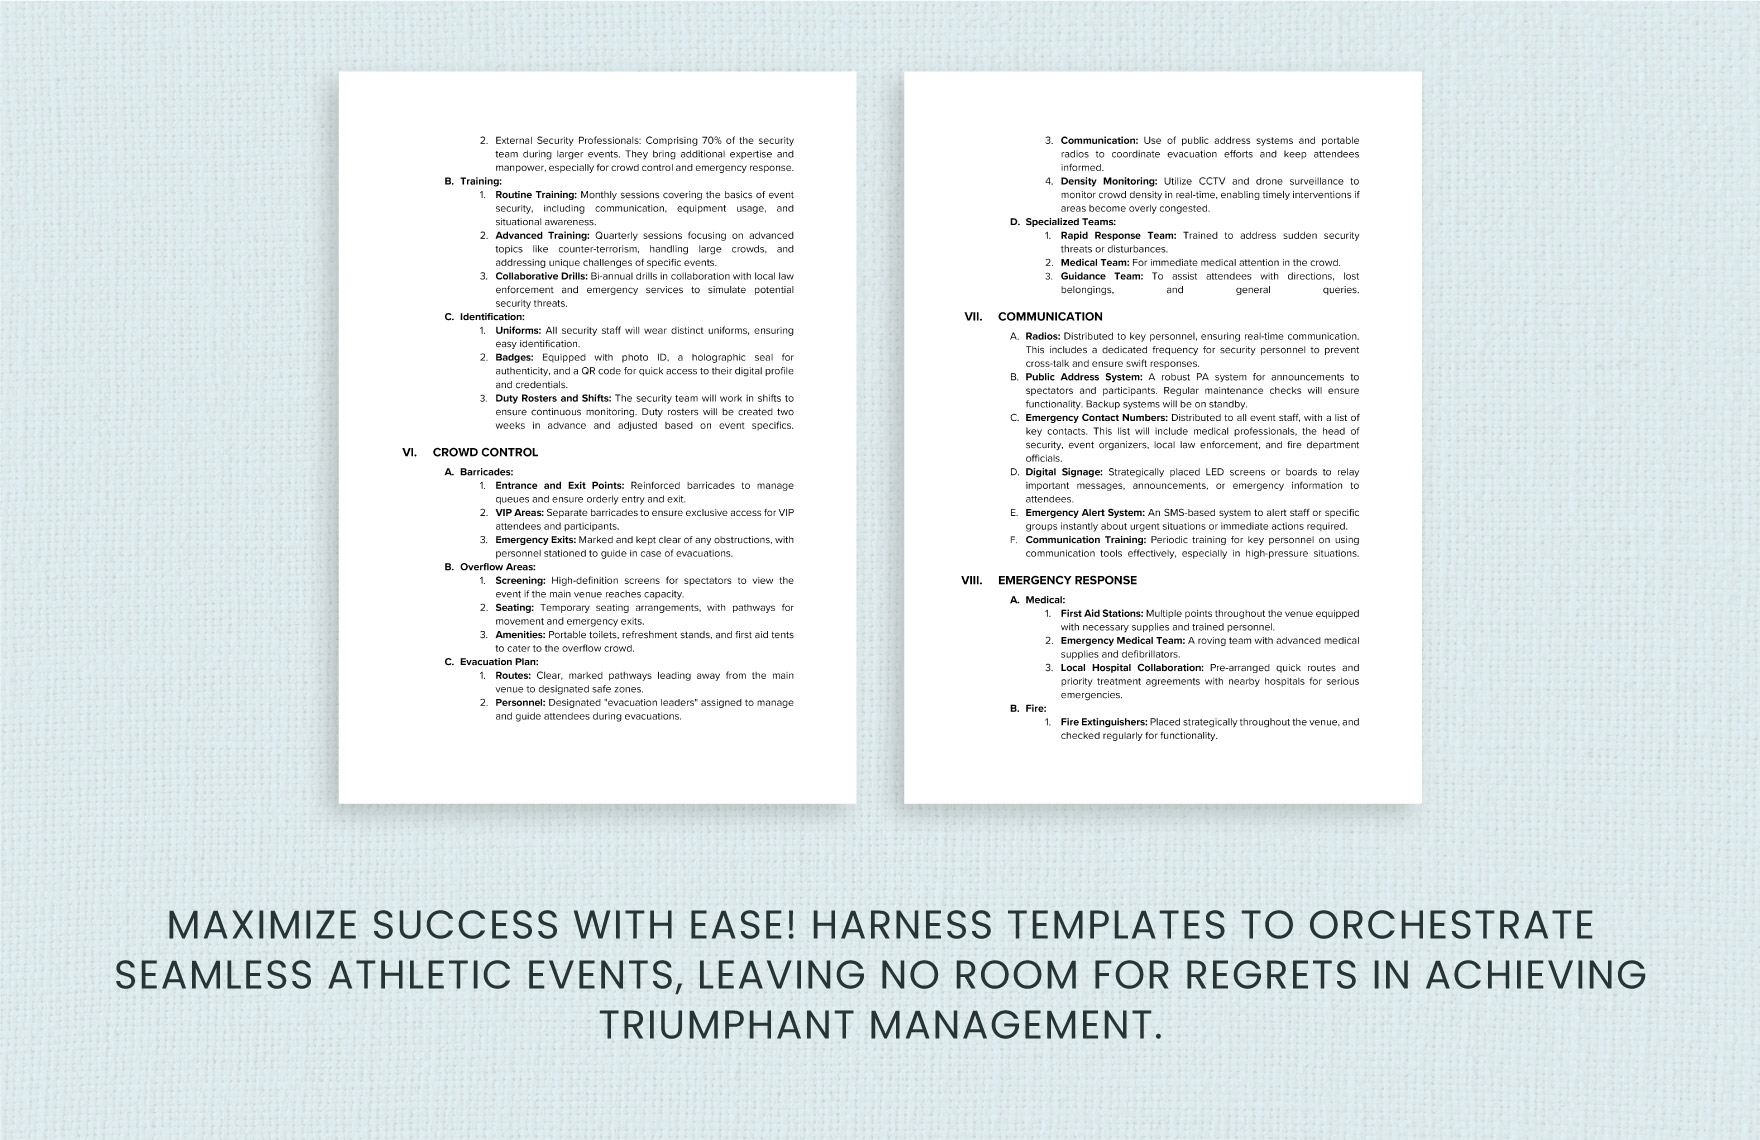 School Athletic Event Security Plan Template